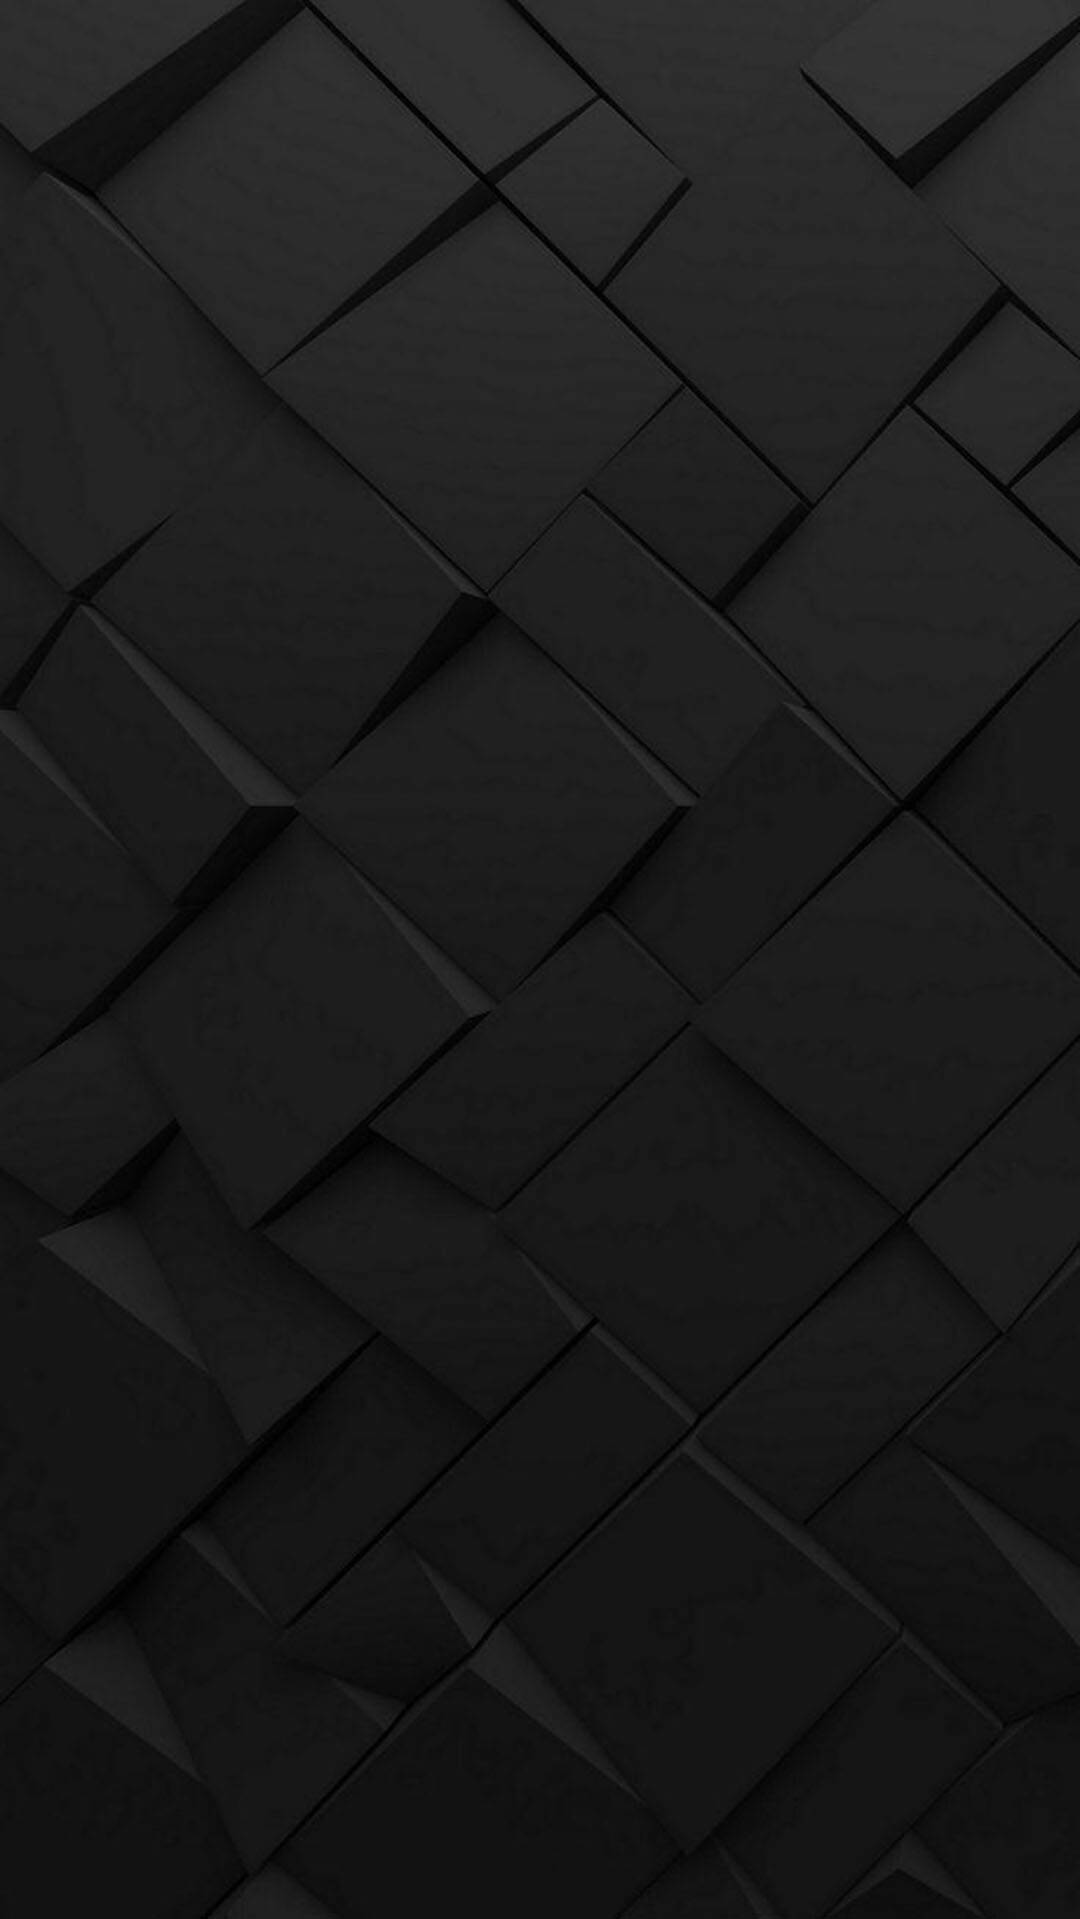 Dark Android 3d Abstract Cube Pattern Wallpaper